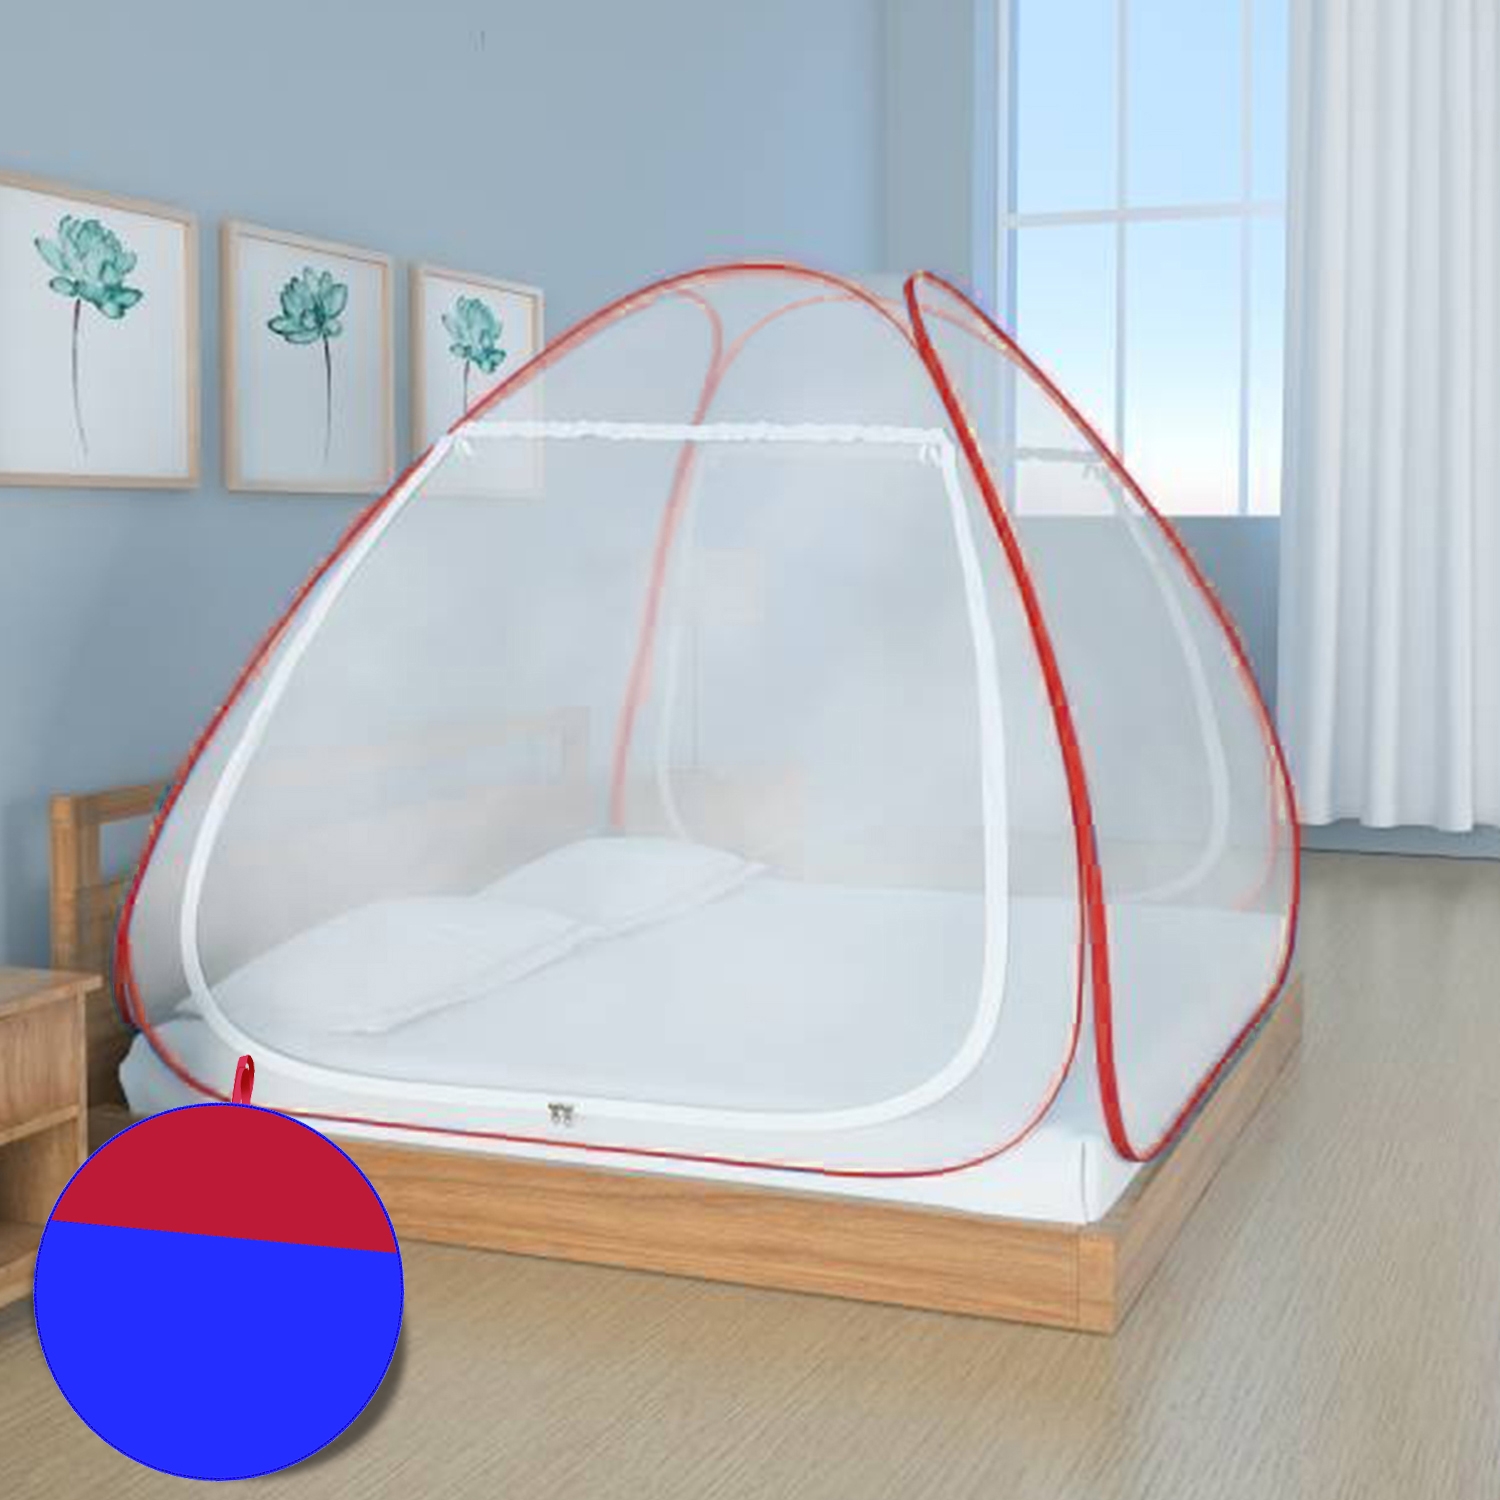 Paola Jewels | Paola Red Mosquito Net Foldable Double Bed Net King Size 